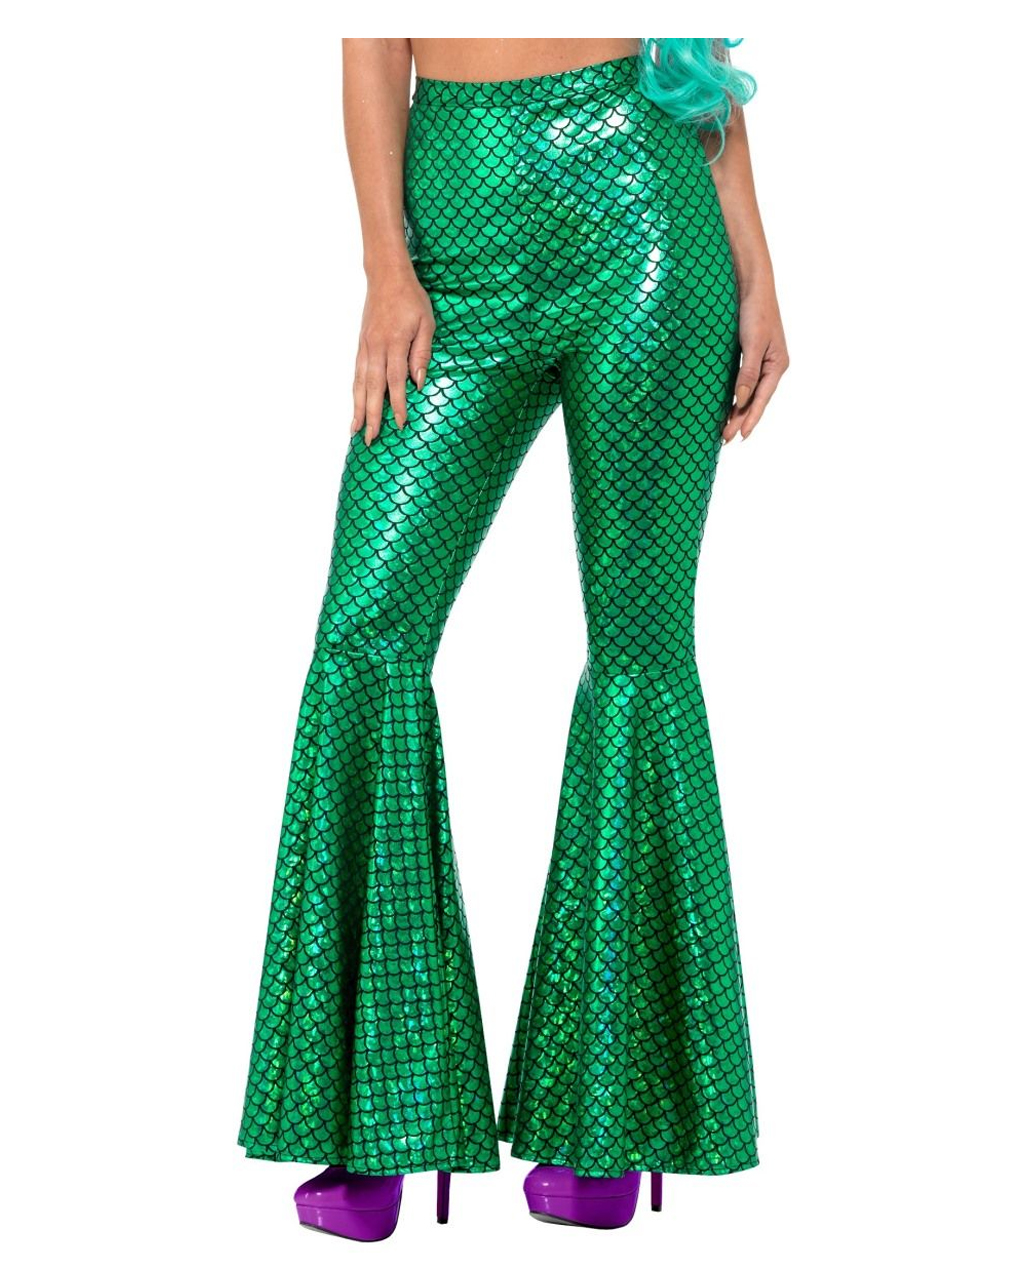 Mermaid Flare Pant Green as costume accessories | horror-shop